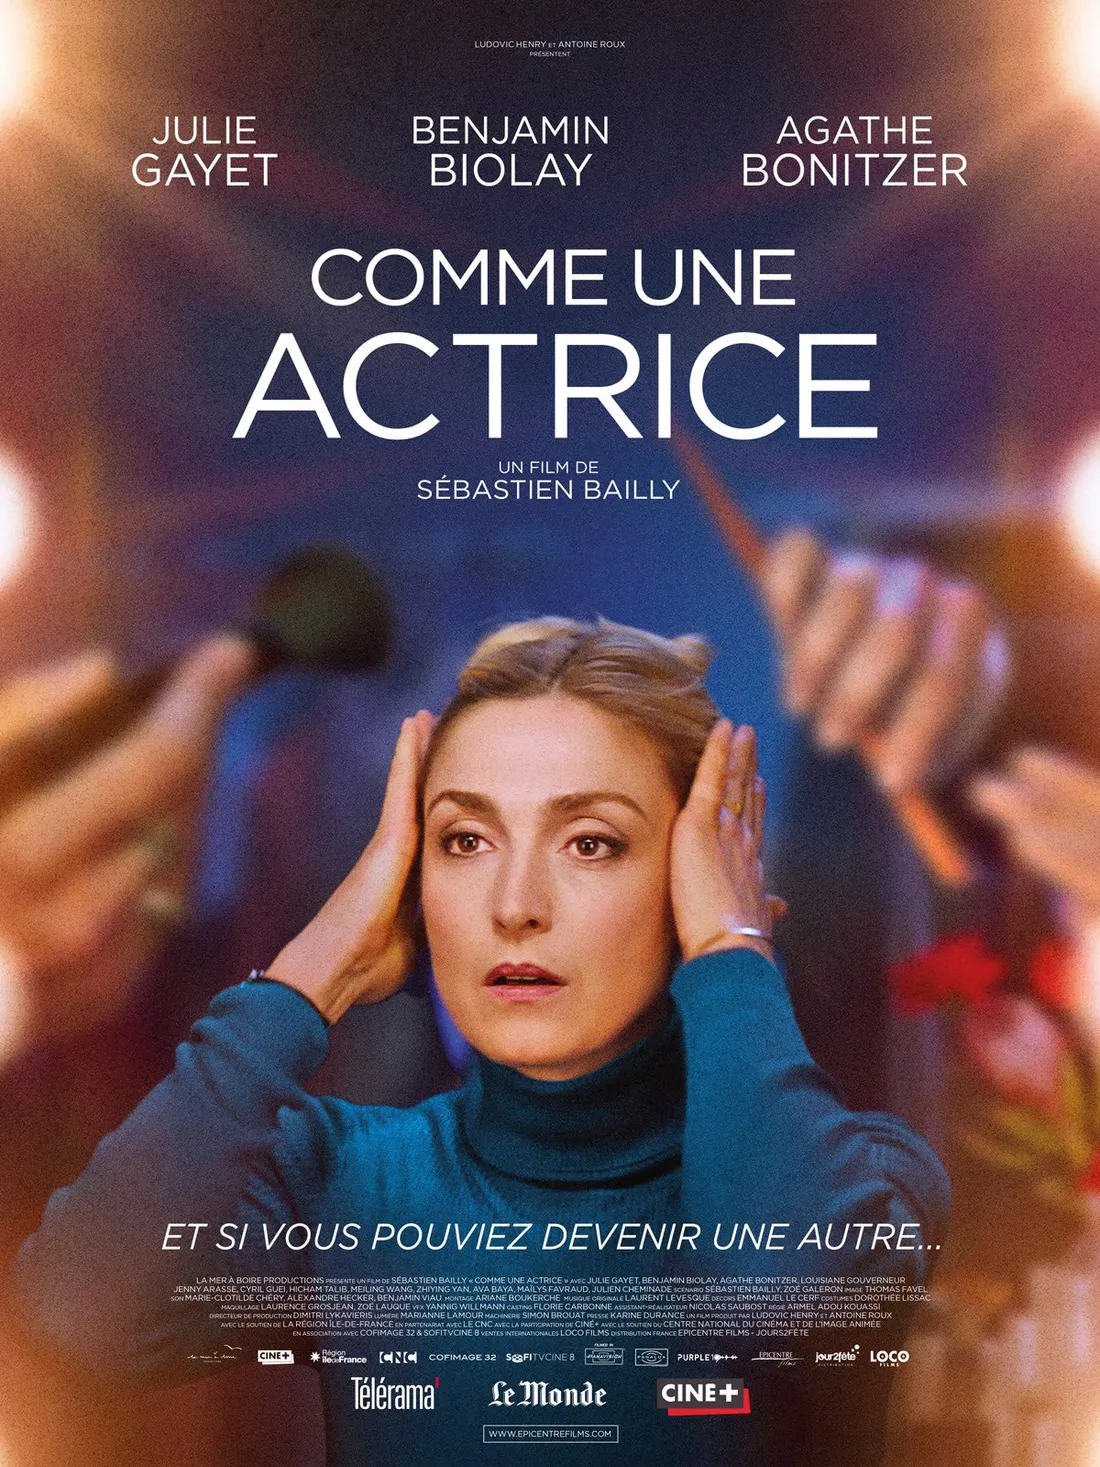 Comme une actrice - Julie Gayet